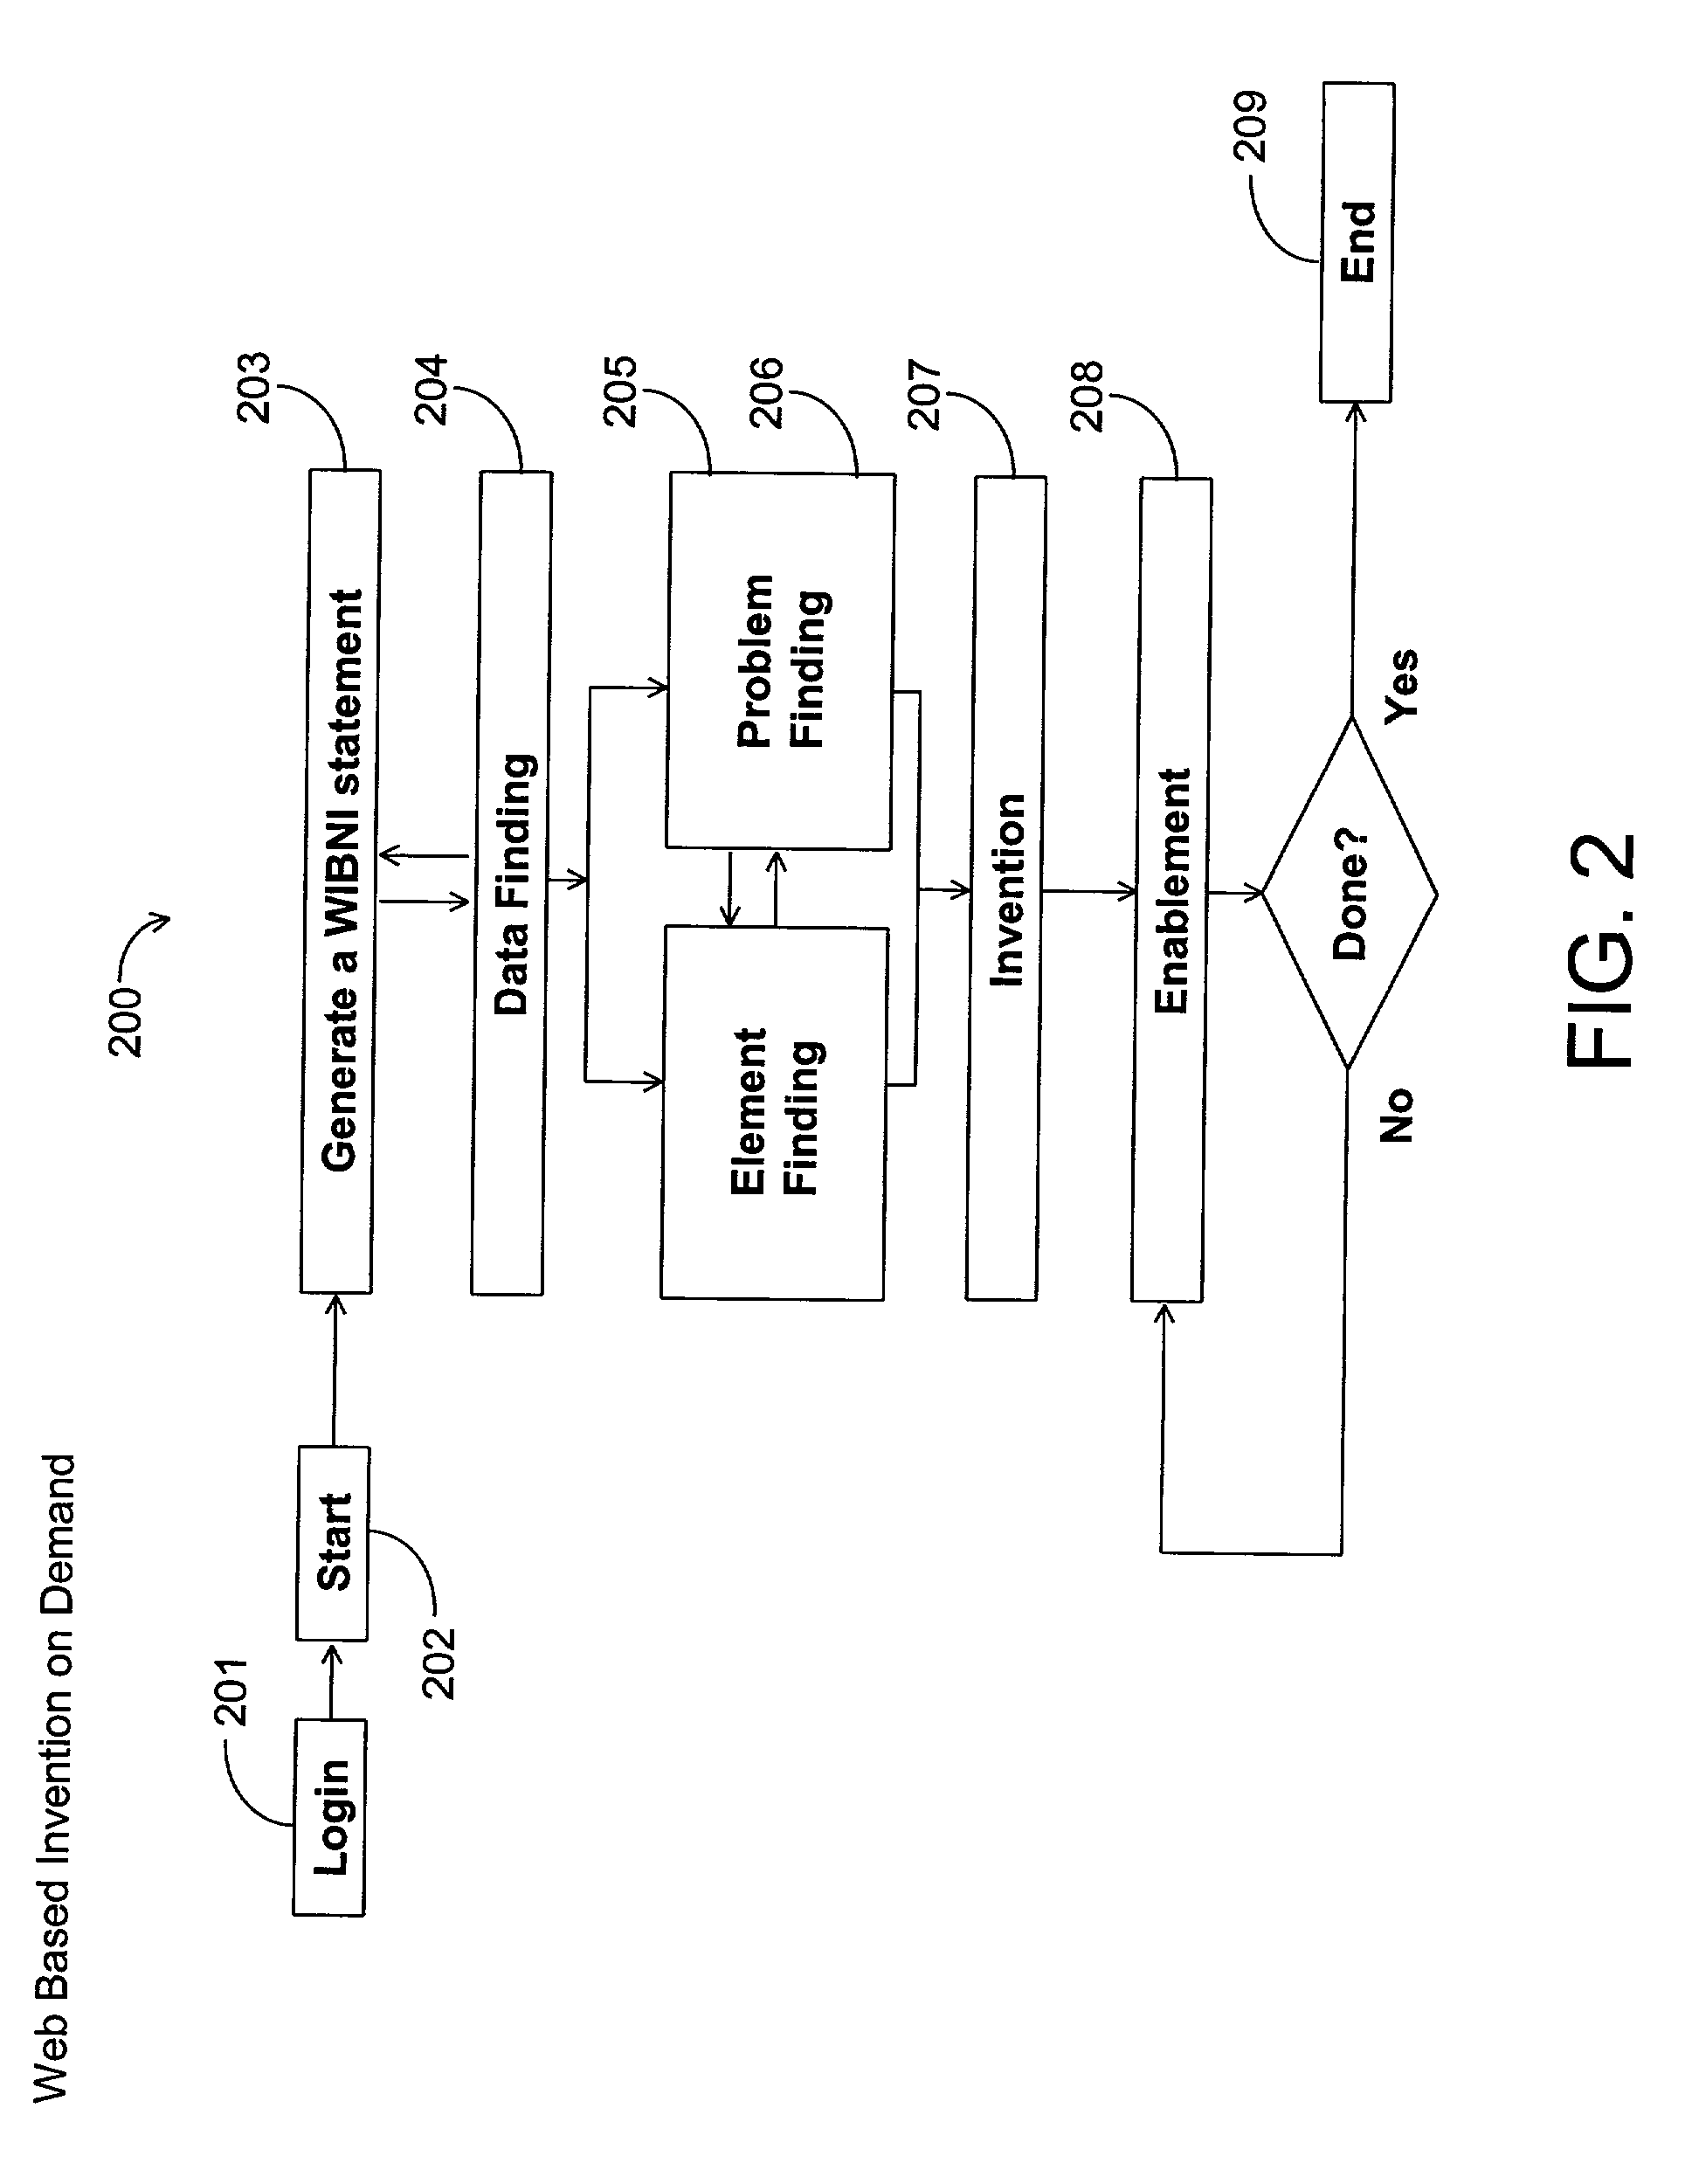 Network-based system and method for facilitating conception of inventions in a directed manner